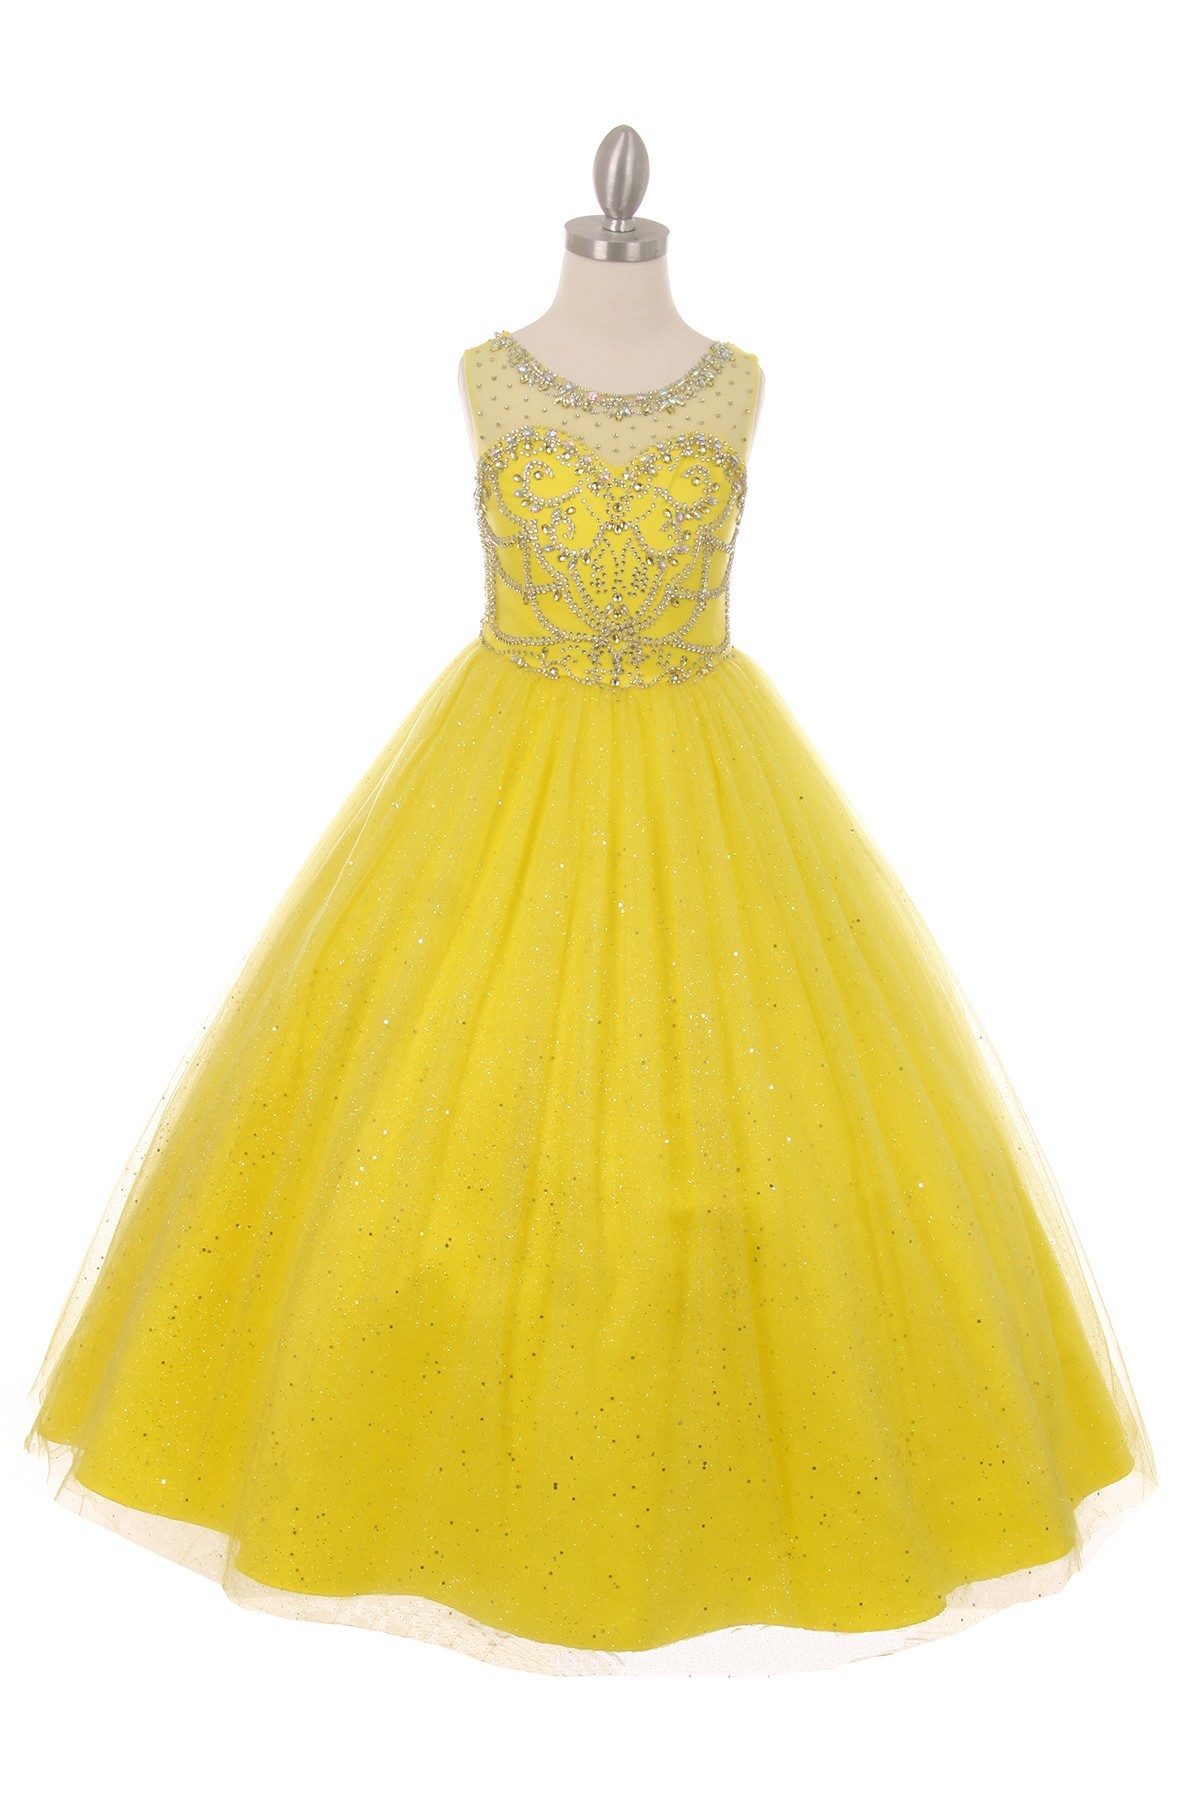 Glitter tulle girls pageant dresses in yellow, mint or blush.